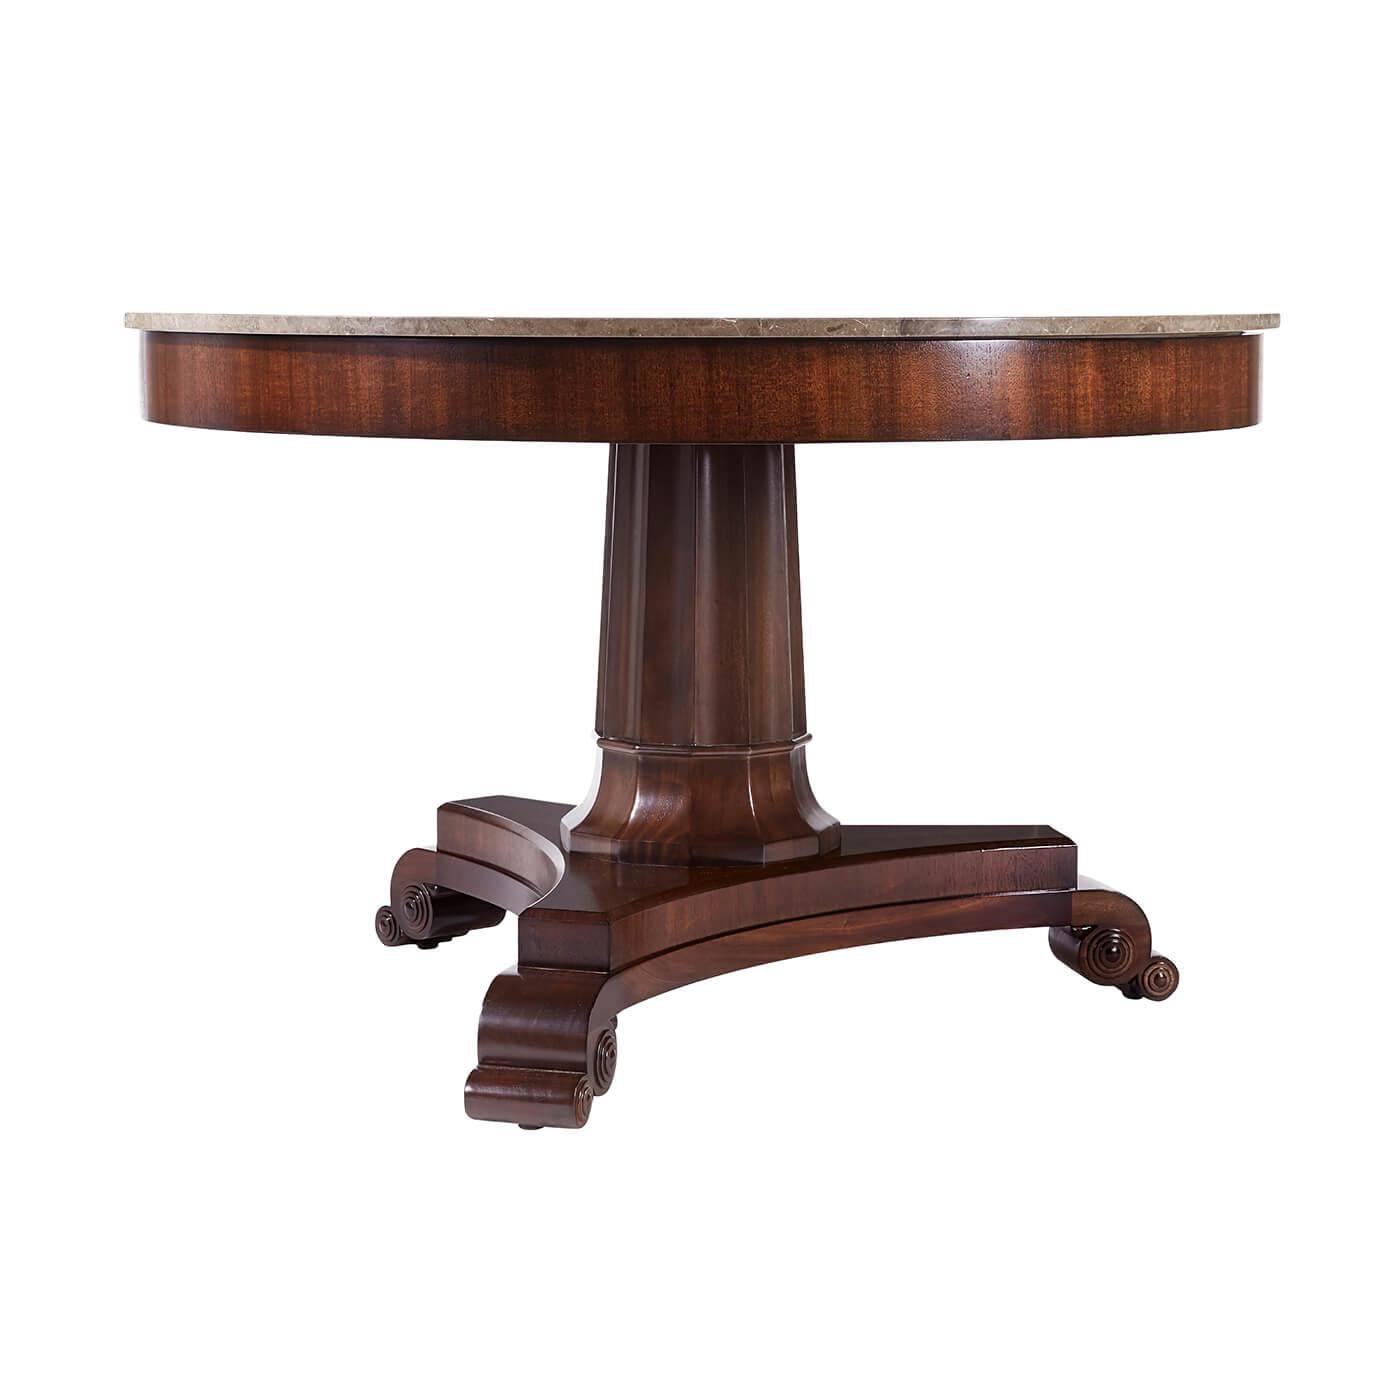 Vietnamese Classical Round Center Table For Sale